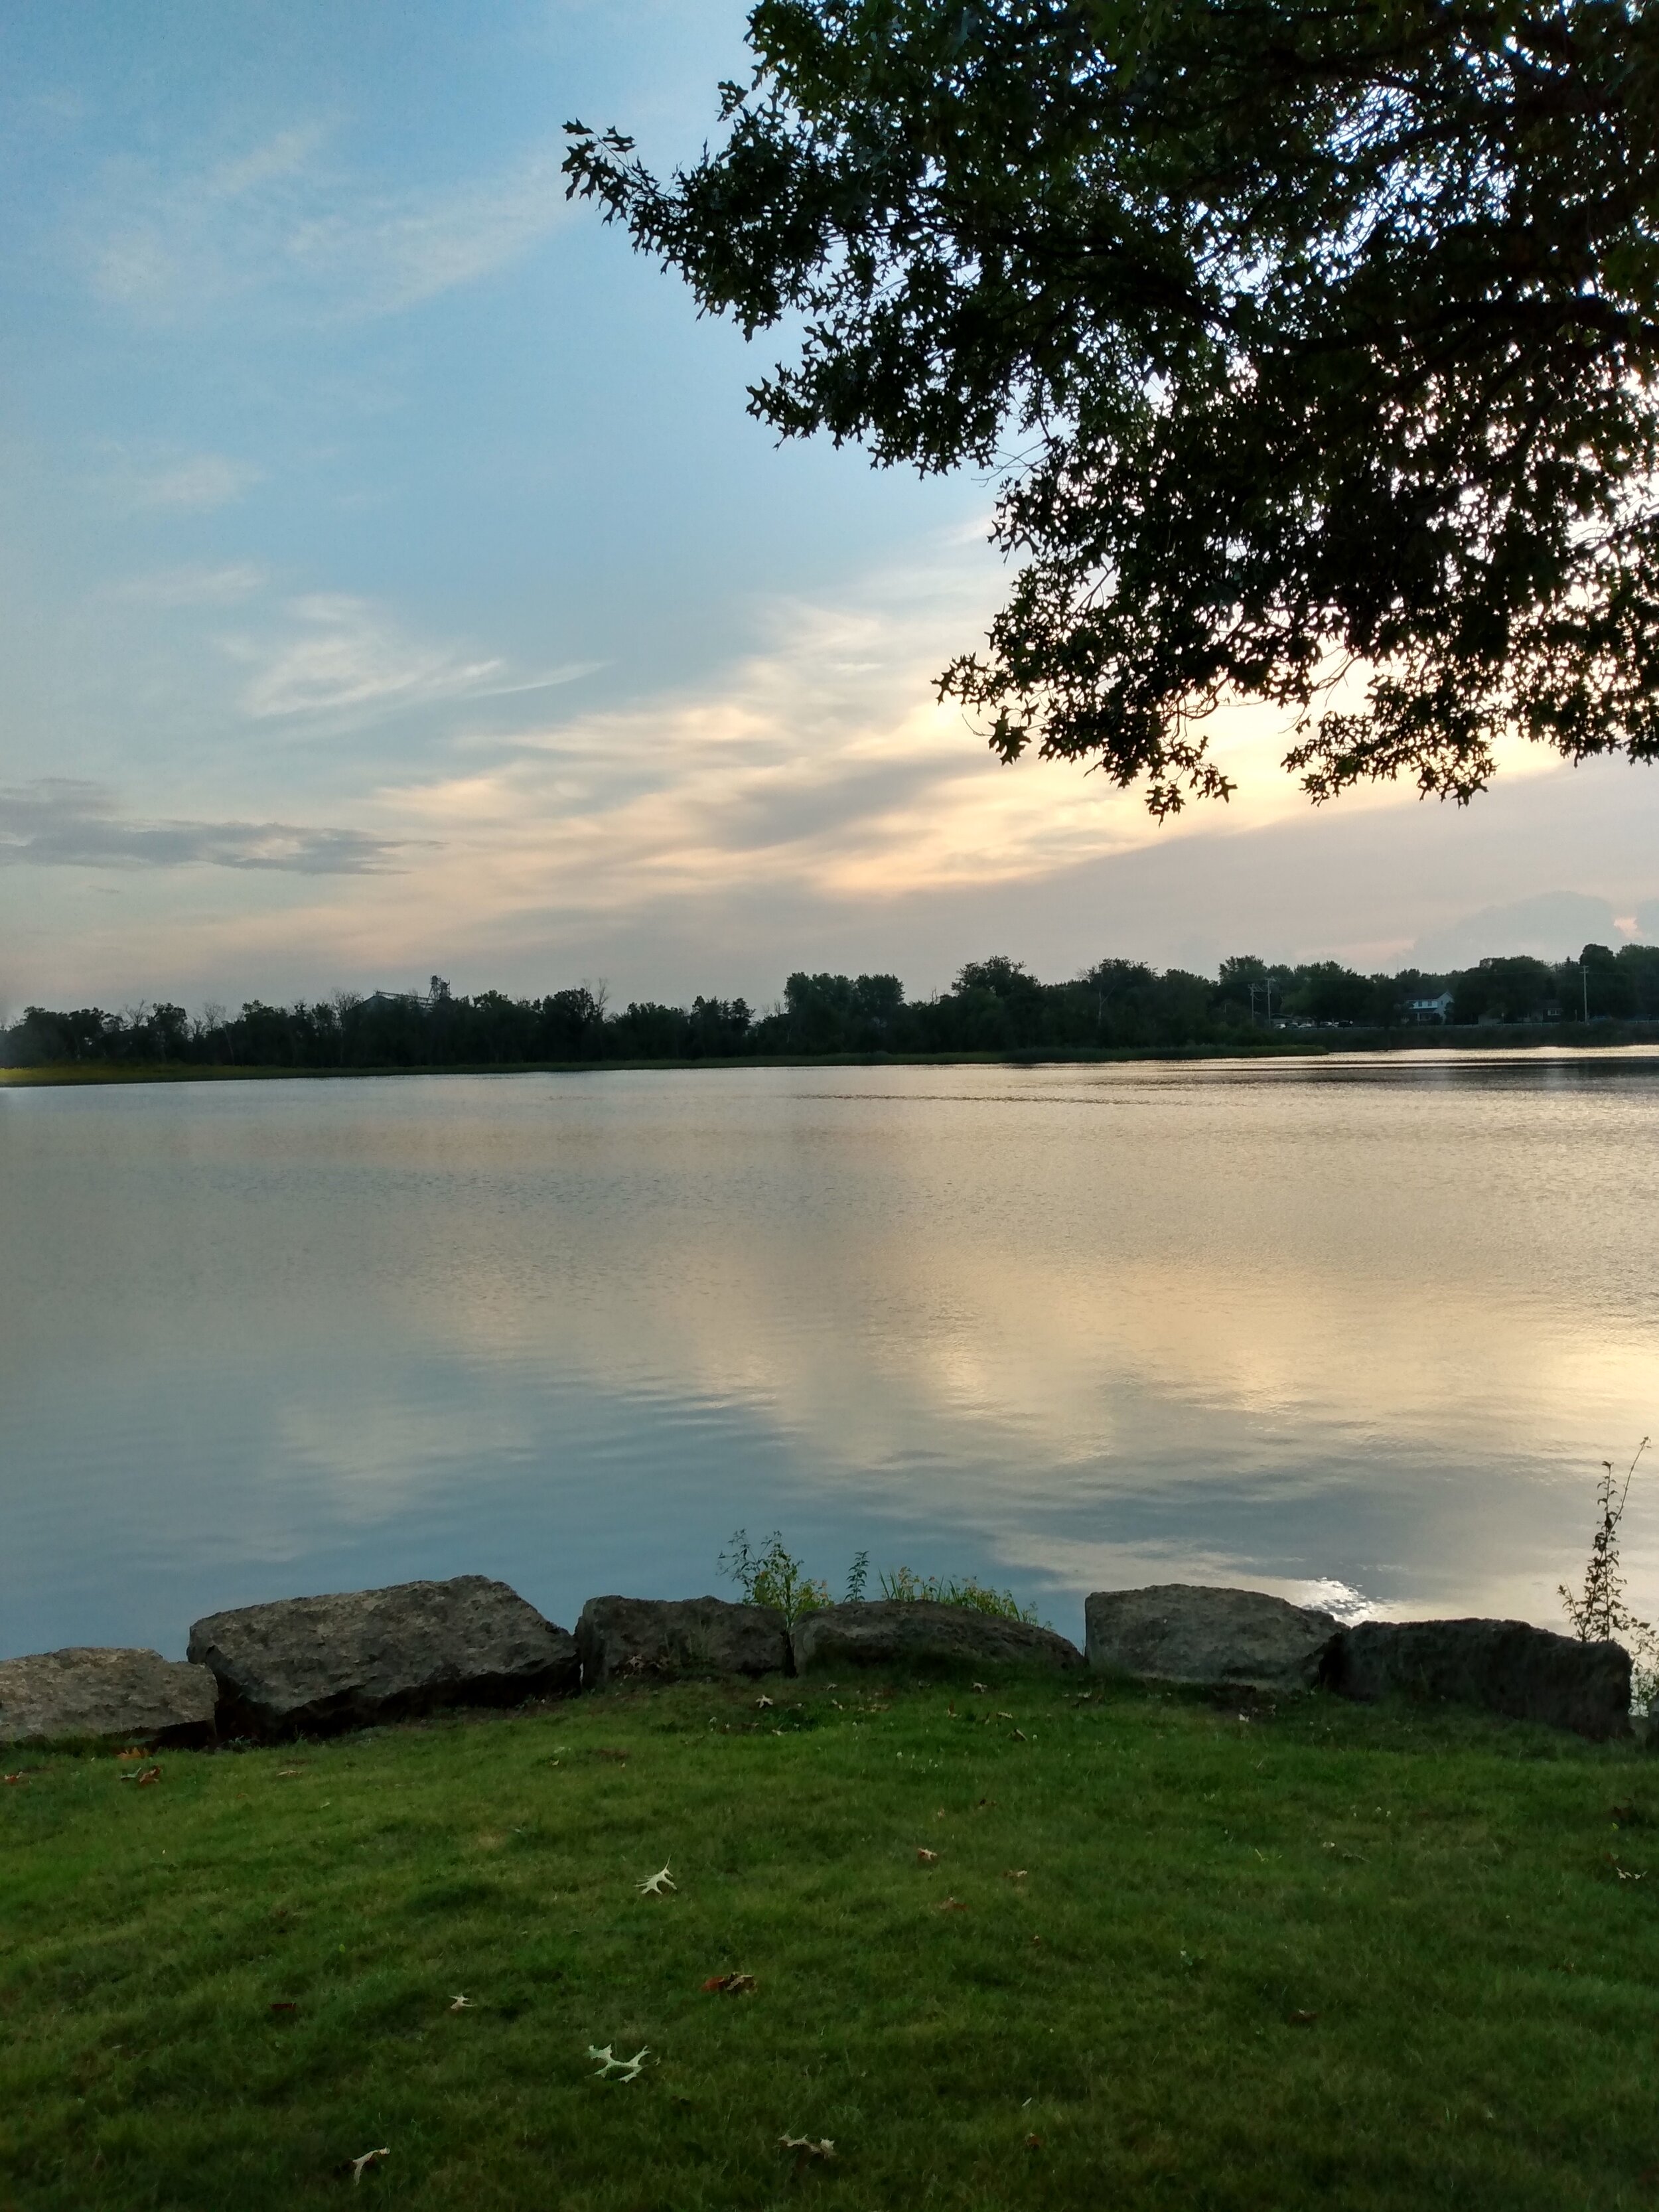 The lake near my home helps keep me sane with its beautiful tranquility. Photo by Ame Vanorio